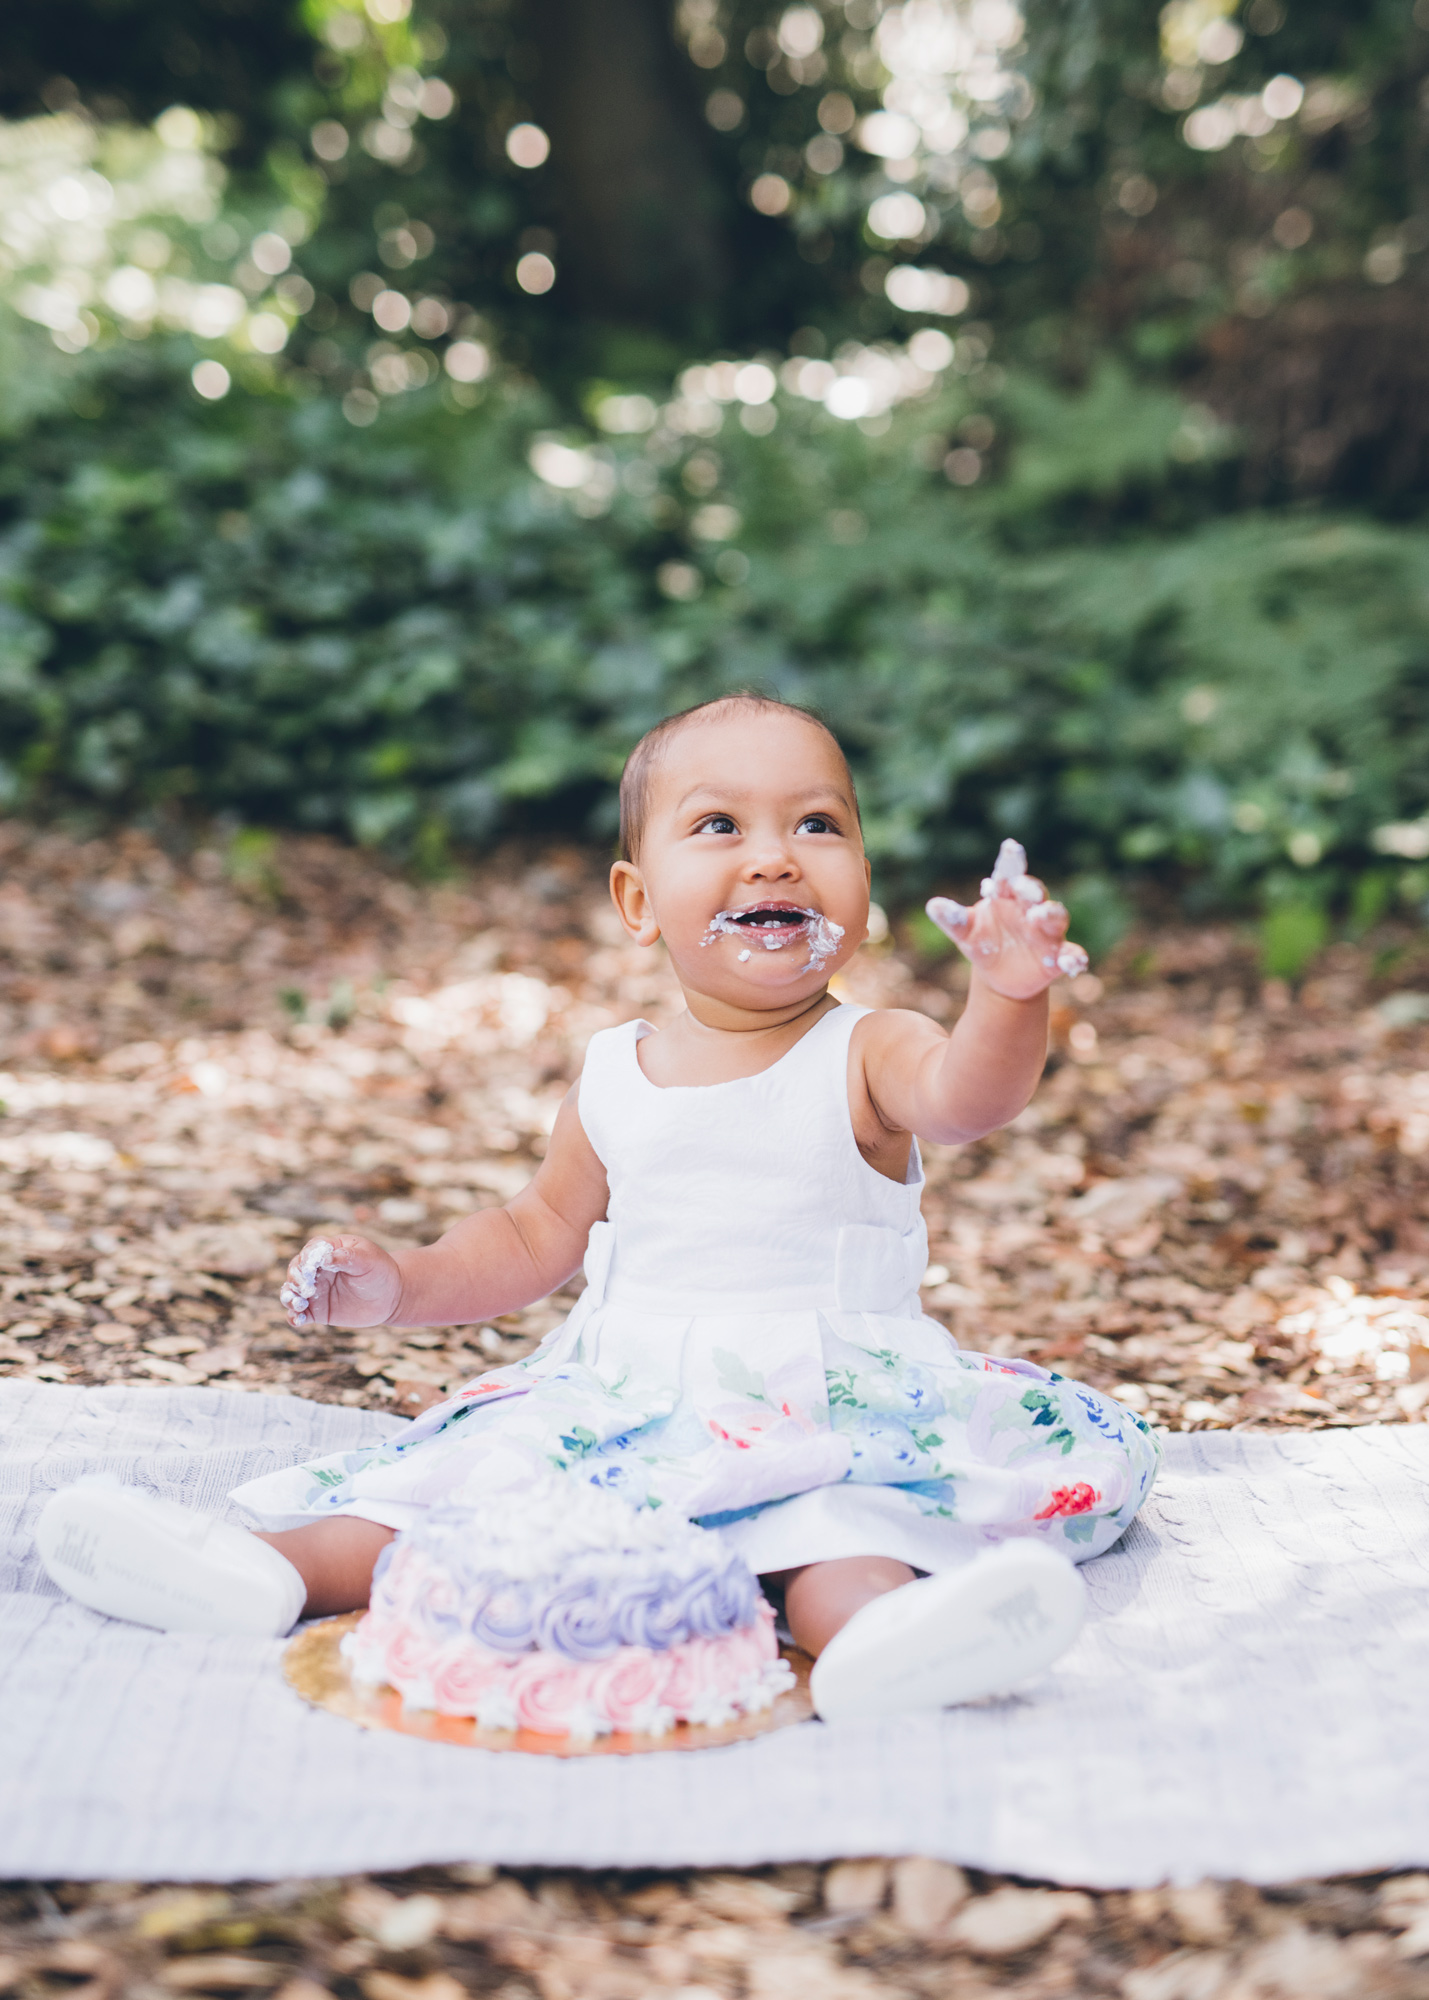 cake-smash-photo-session-for-baby's-first-birthday.jpg